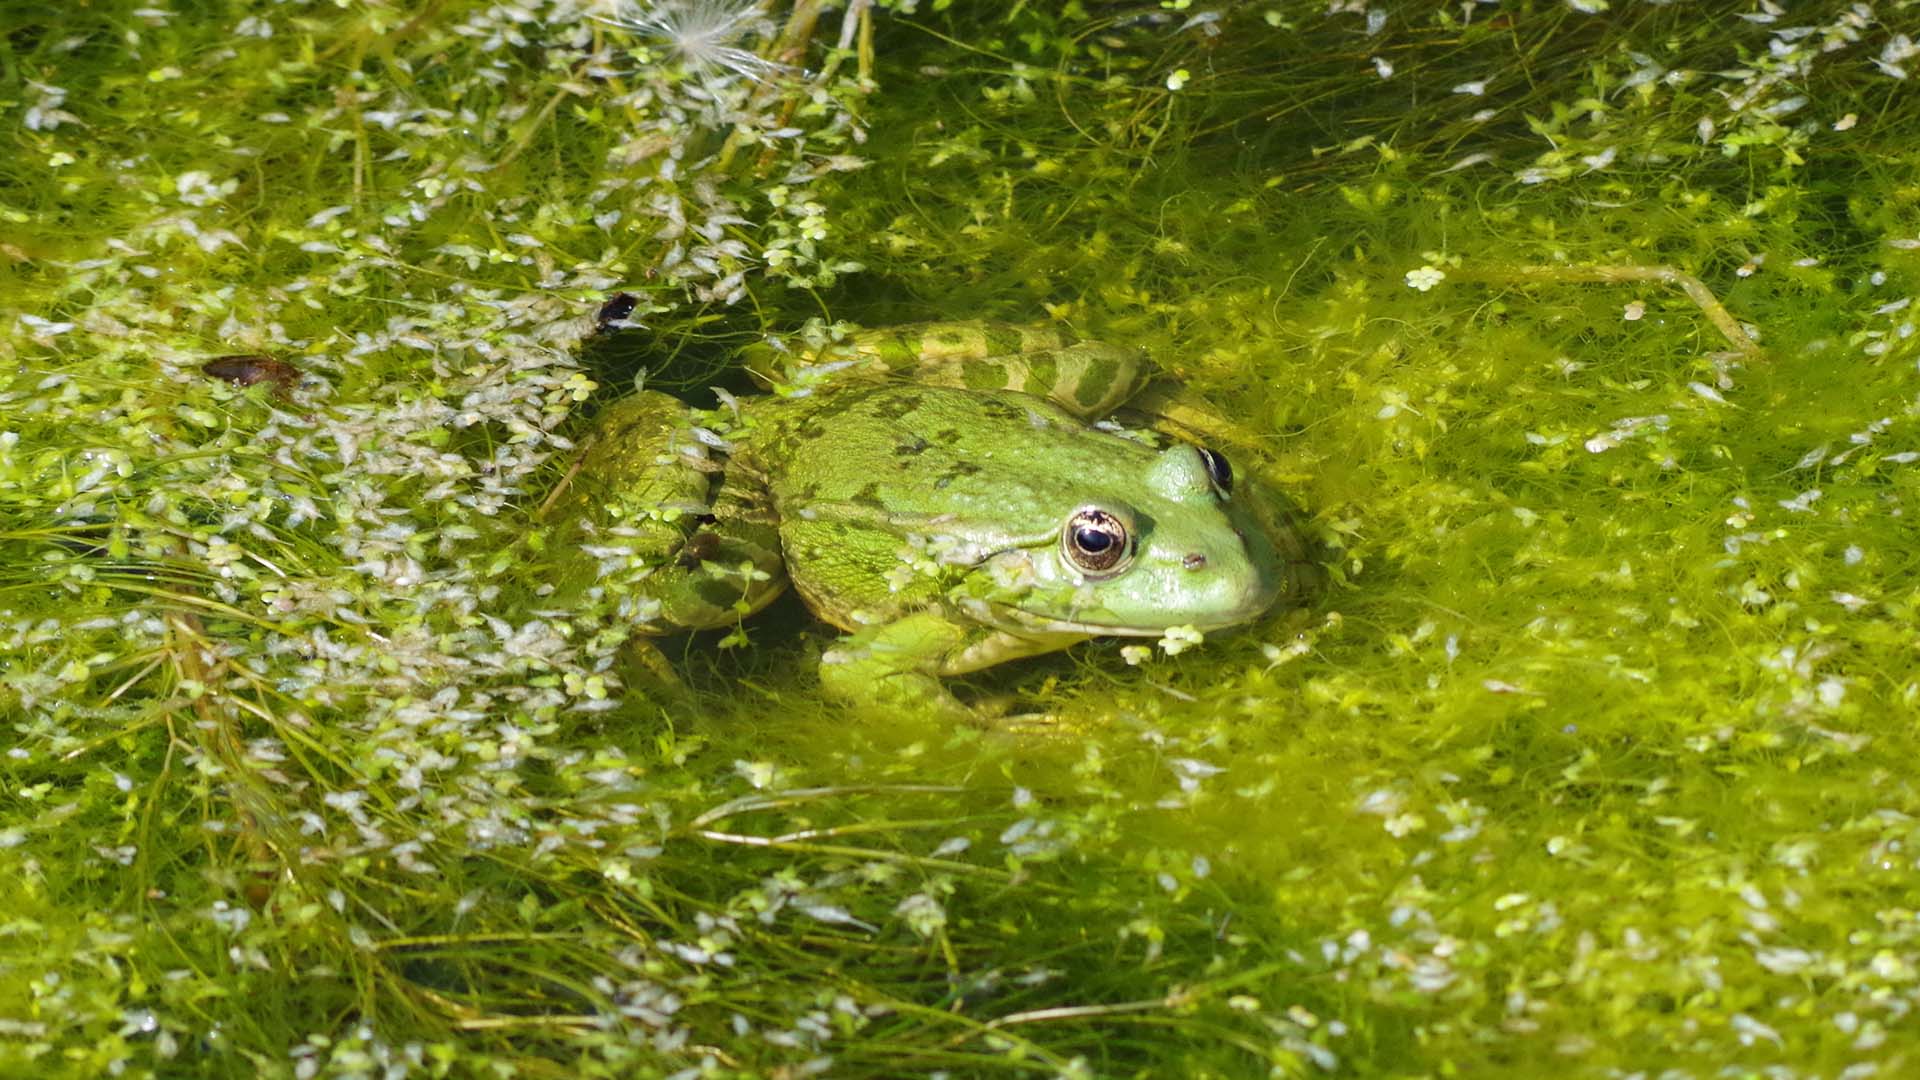 The Story Of The Introduced Marsh Frog